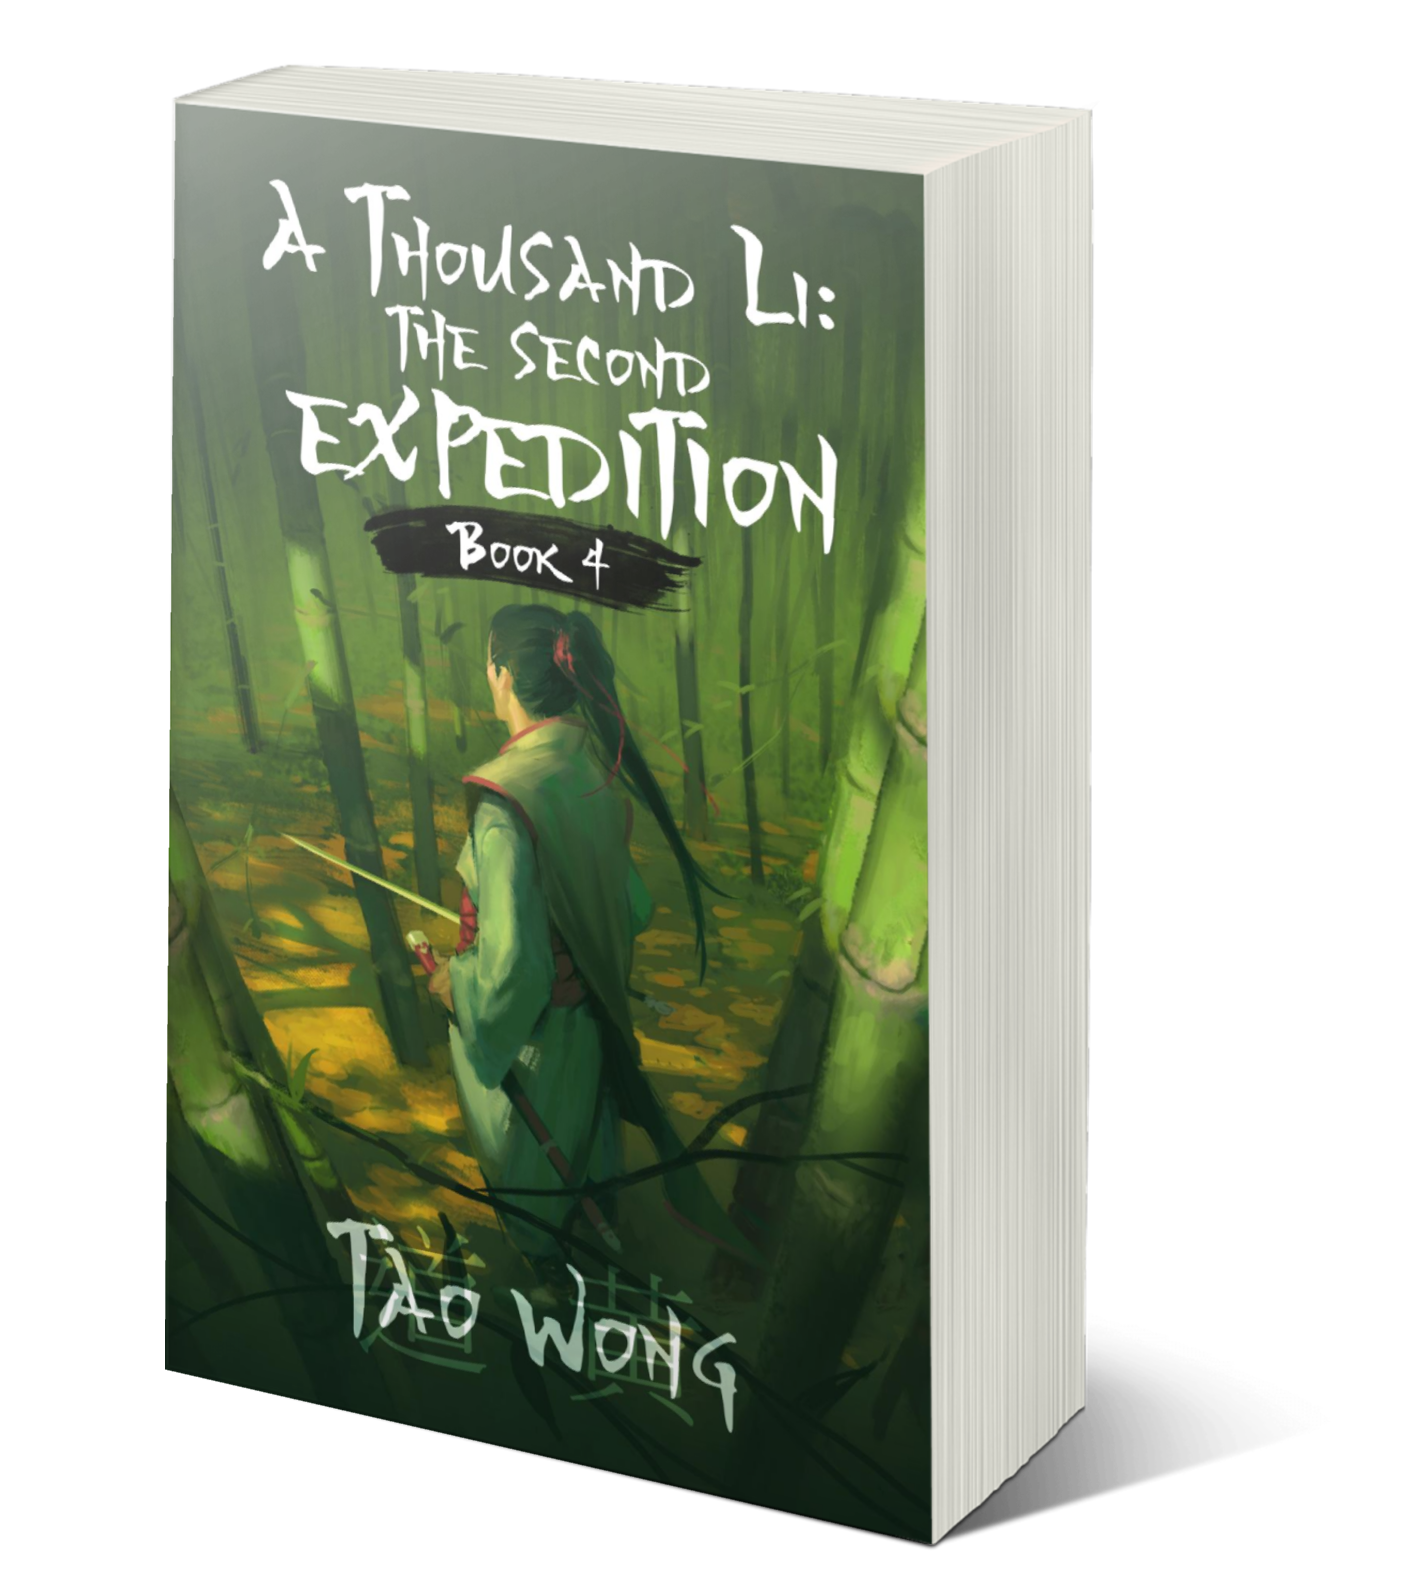 The Second Expedition (A Thousand Li #4)